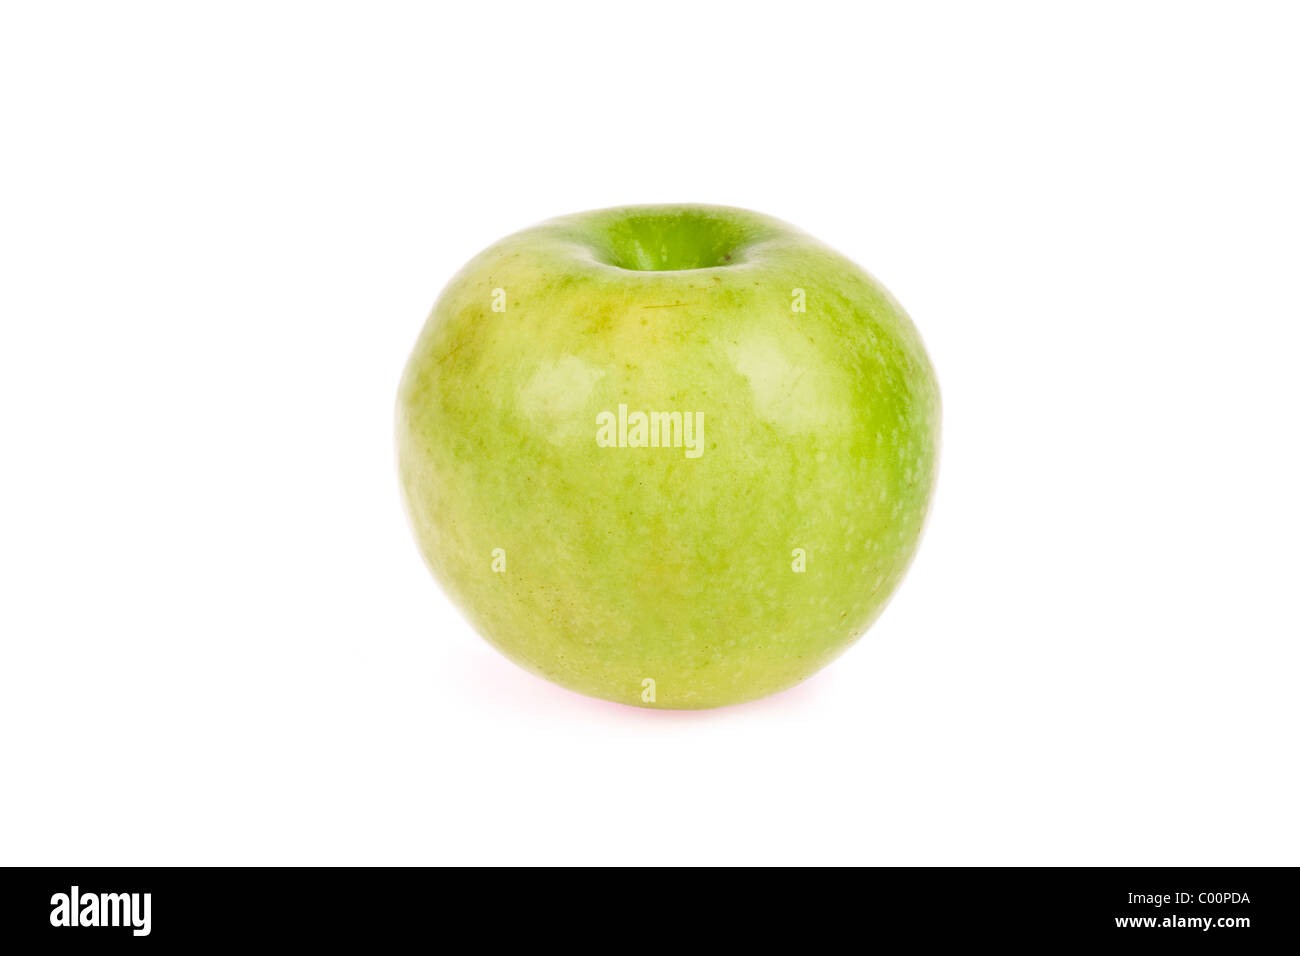 A green Granny Smith apple on isolated background. Stock Photo